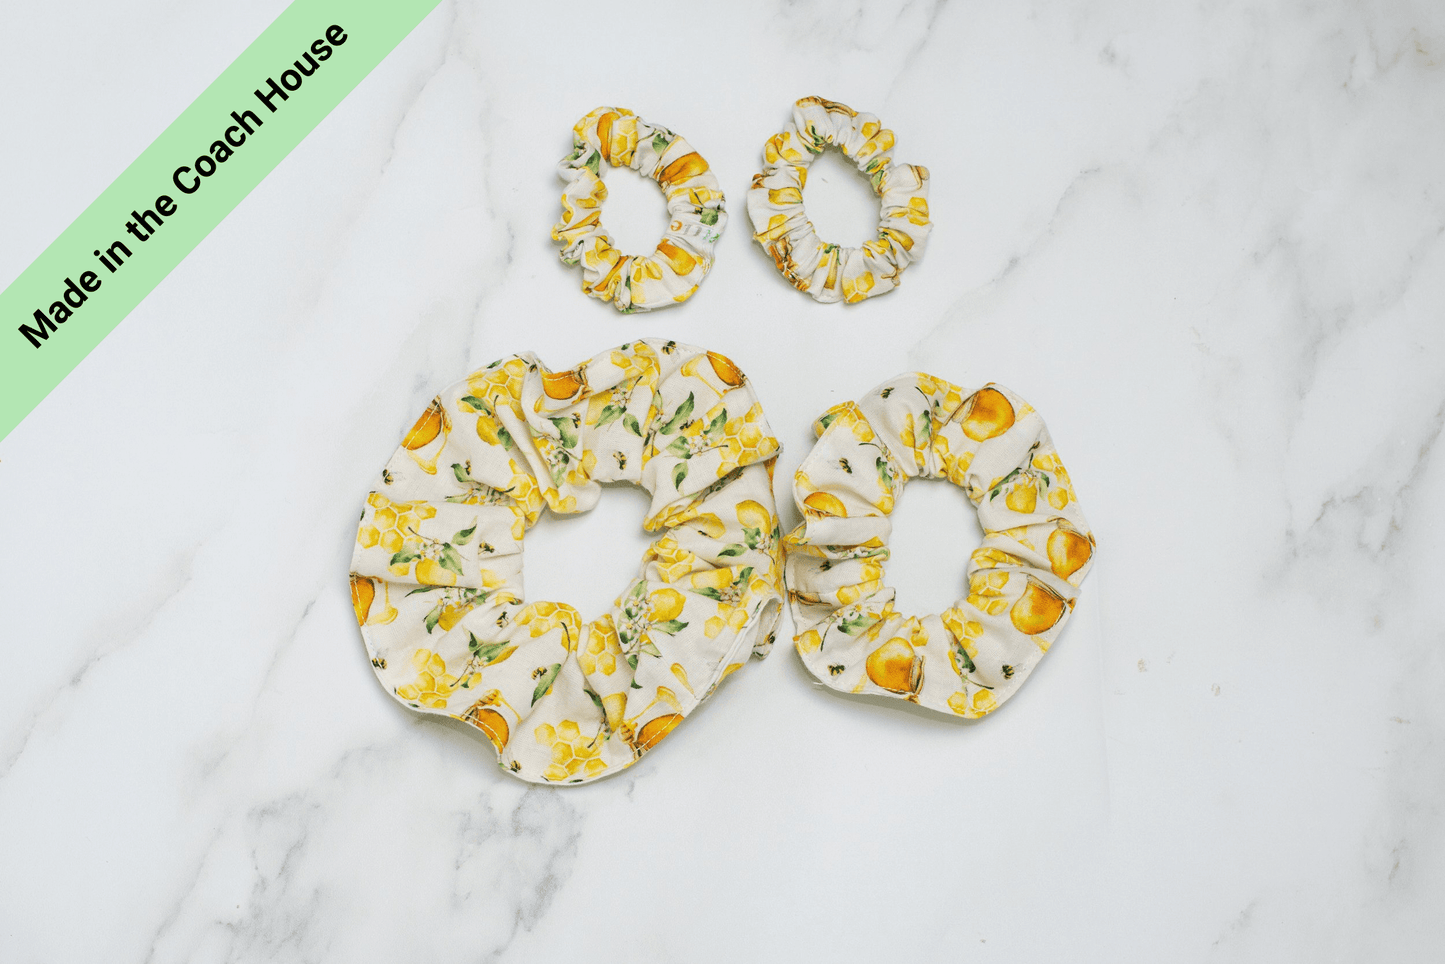 Honey and Bees Scrunchies